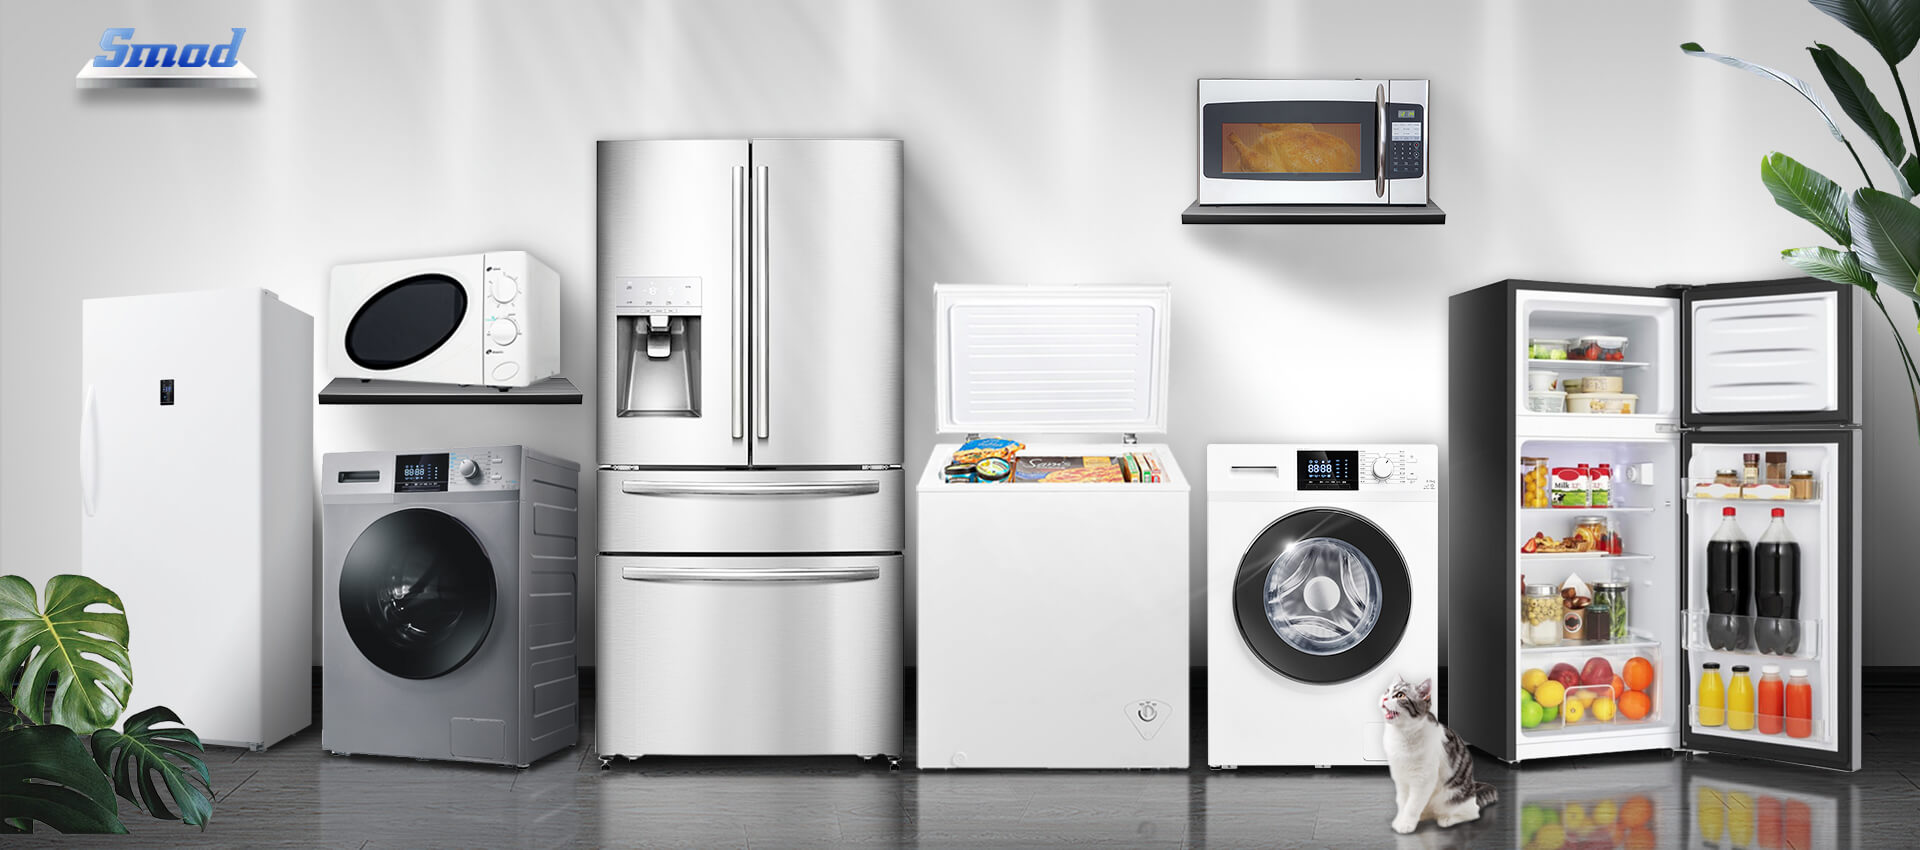 Smad home appliances products include refrigerators, freezers, microwave ovens, dishwashers, washing machines, etc.